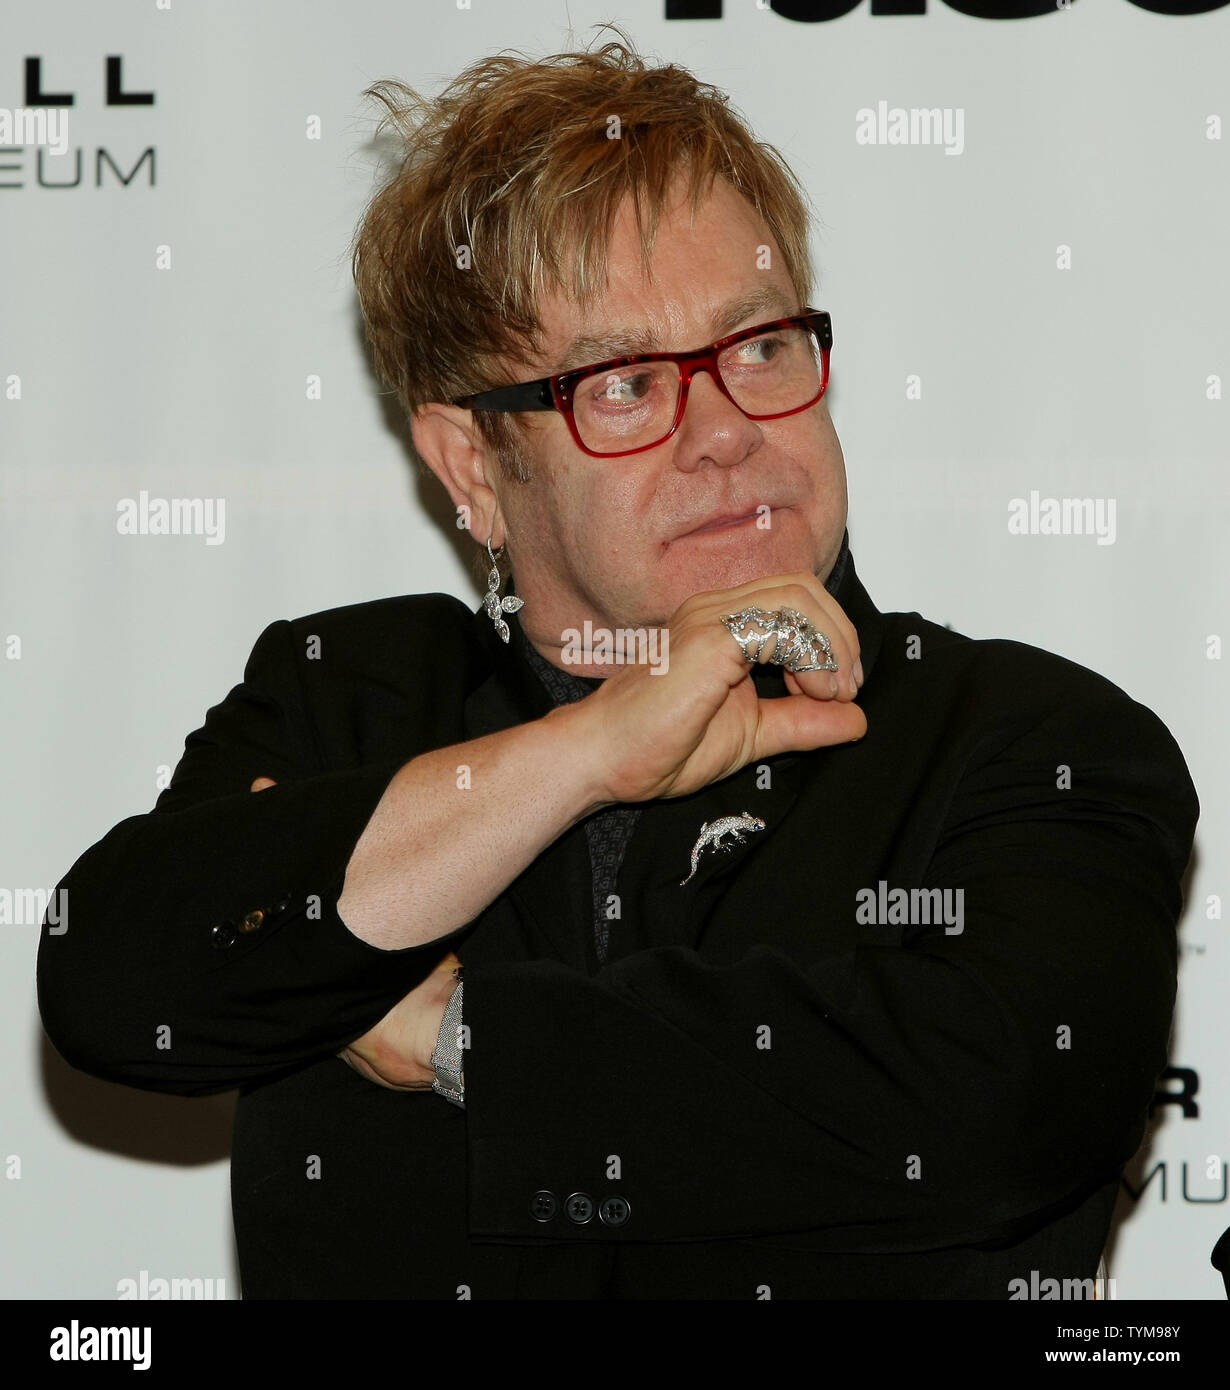 Elton John listens to reporters at the Rock and Roll Hall of Fame induction ceremony where he will introduce inductee Leon Russell at the Waldorf-Astoria hotel in New York on March 14, 2011.      UPI Photo/Monika Graff... Stock Photo